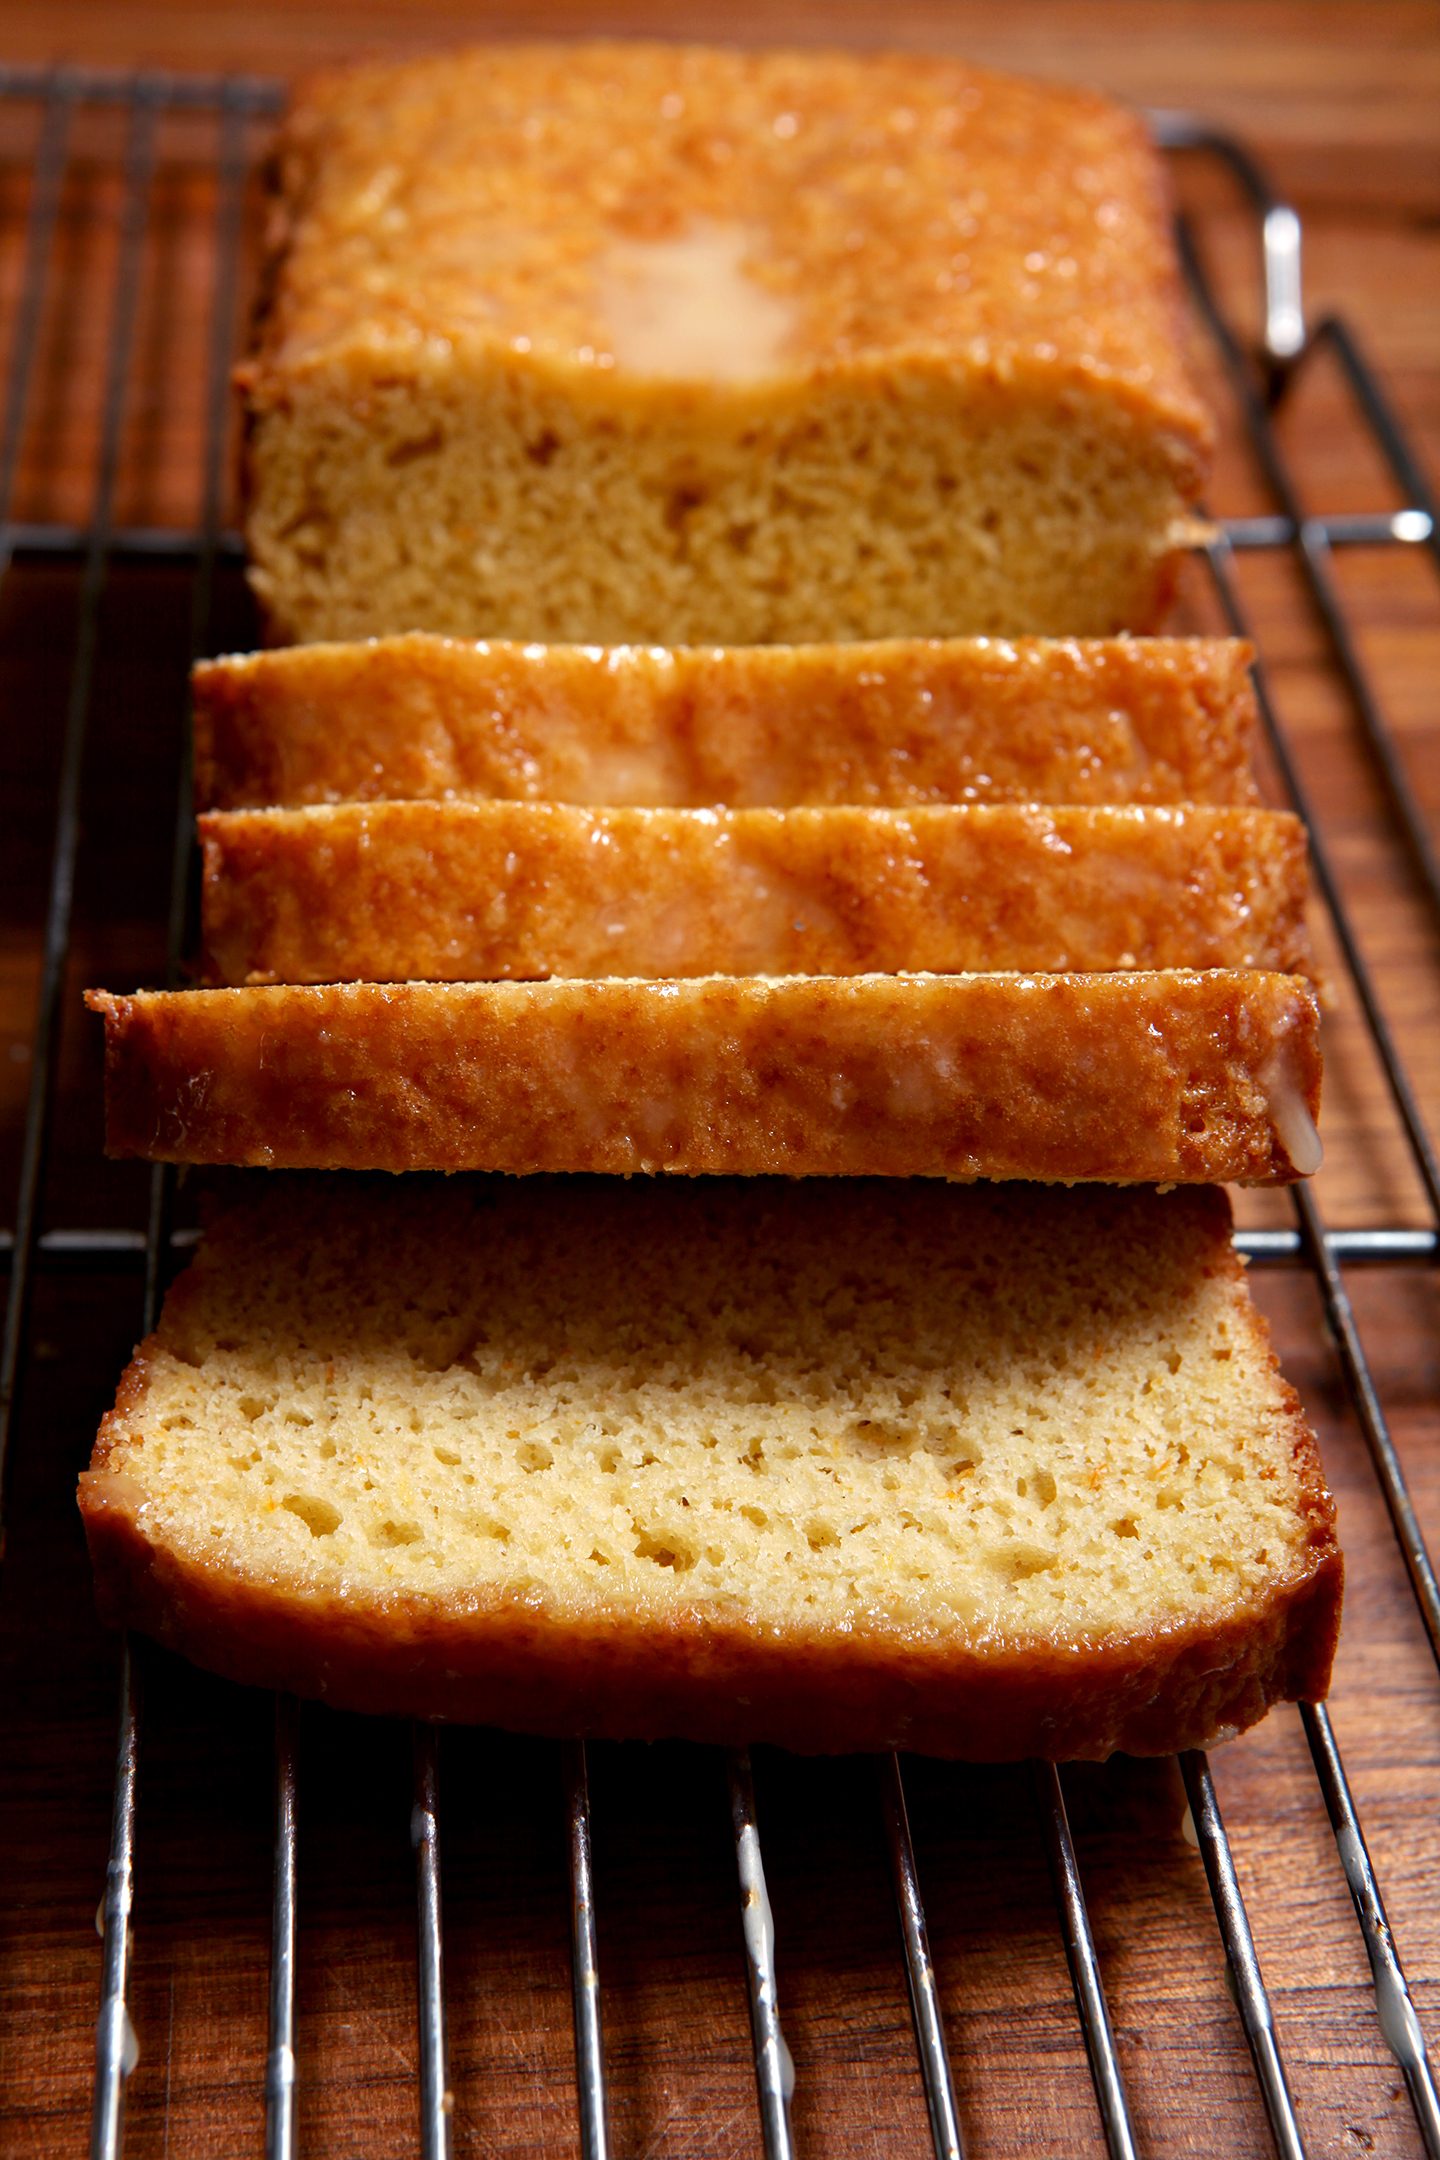 Orange Pound Cake | Bake your mama up a sweet surprise to start her Mother's Day with this Orange Pound Cake. Simple, delicious, slightly sweet and perfect with her morning coffee, your mom will adore this baked good! | @speckledpalate for @mycookingspot